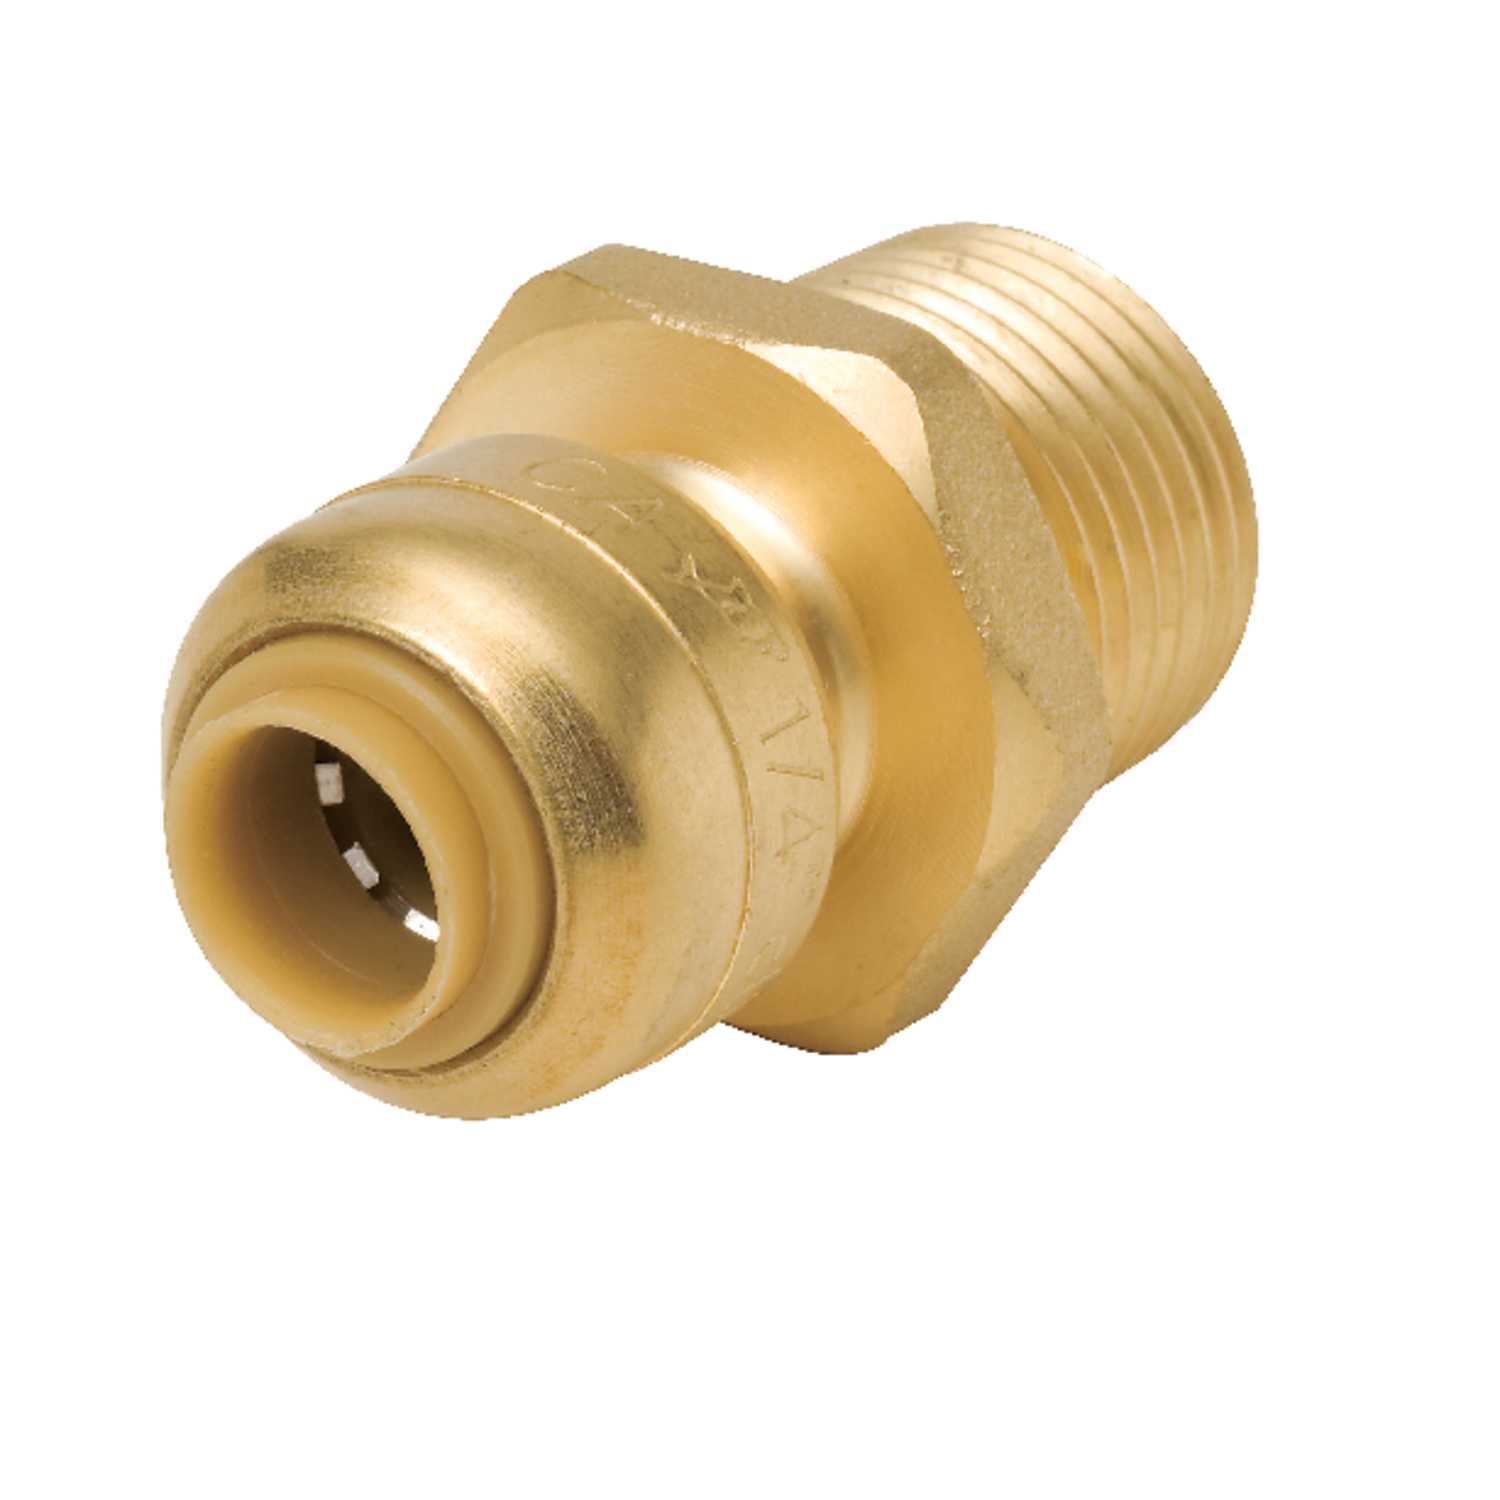 sharkbite connector push mpt dia brass hardware ace fittings pipe